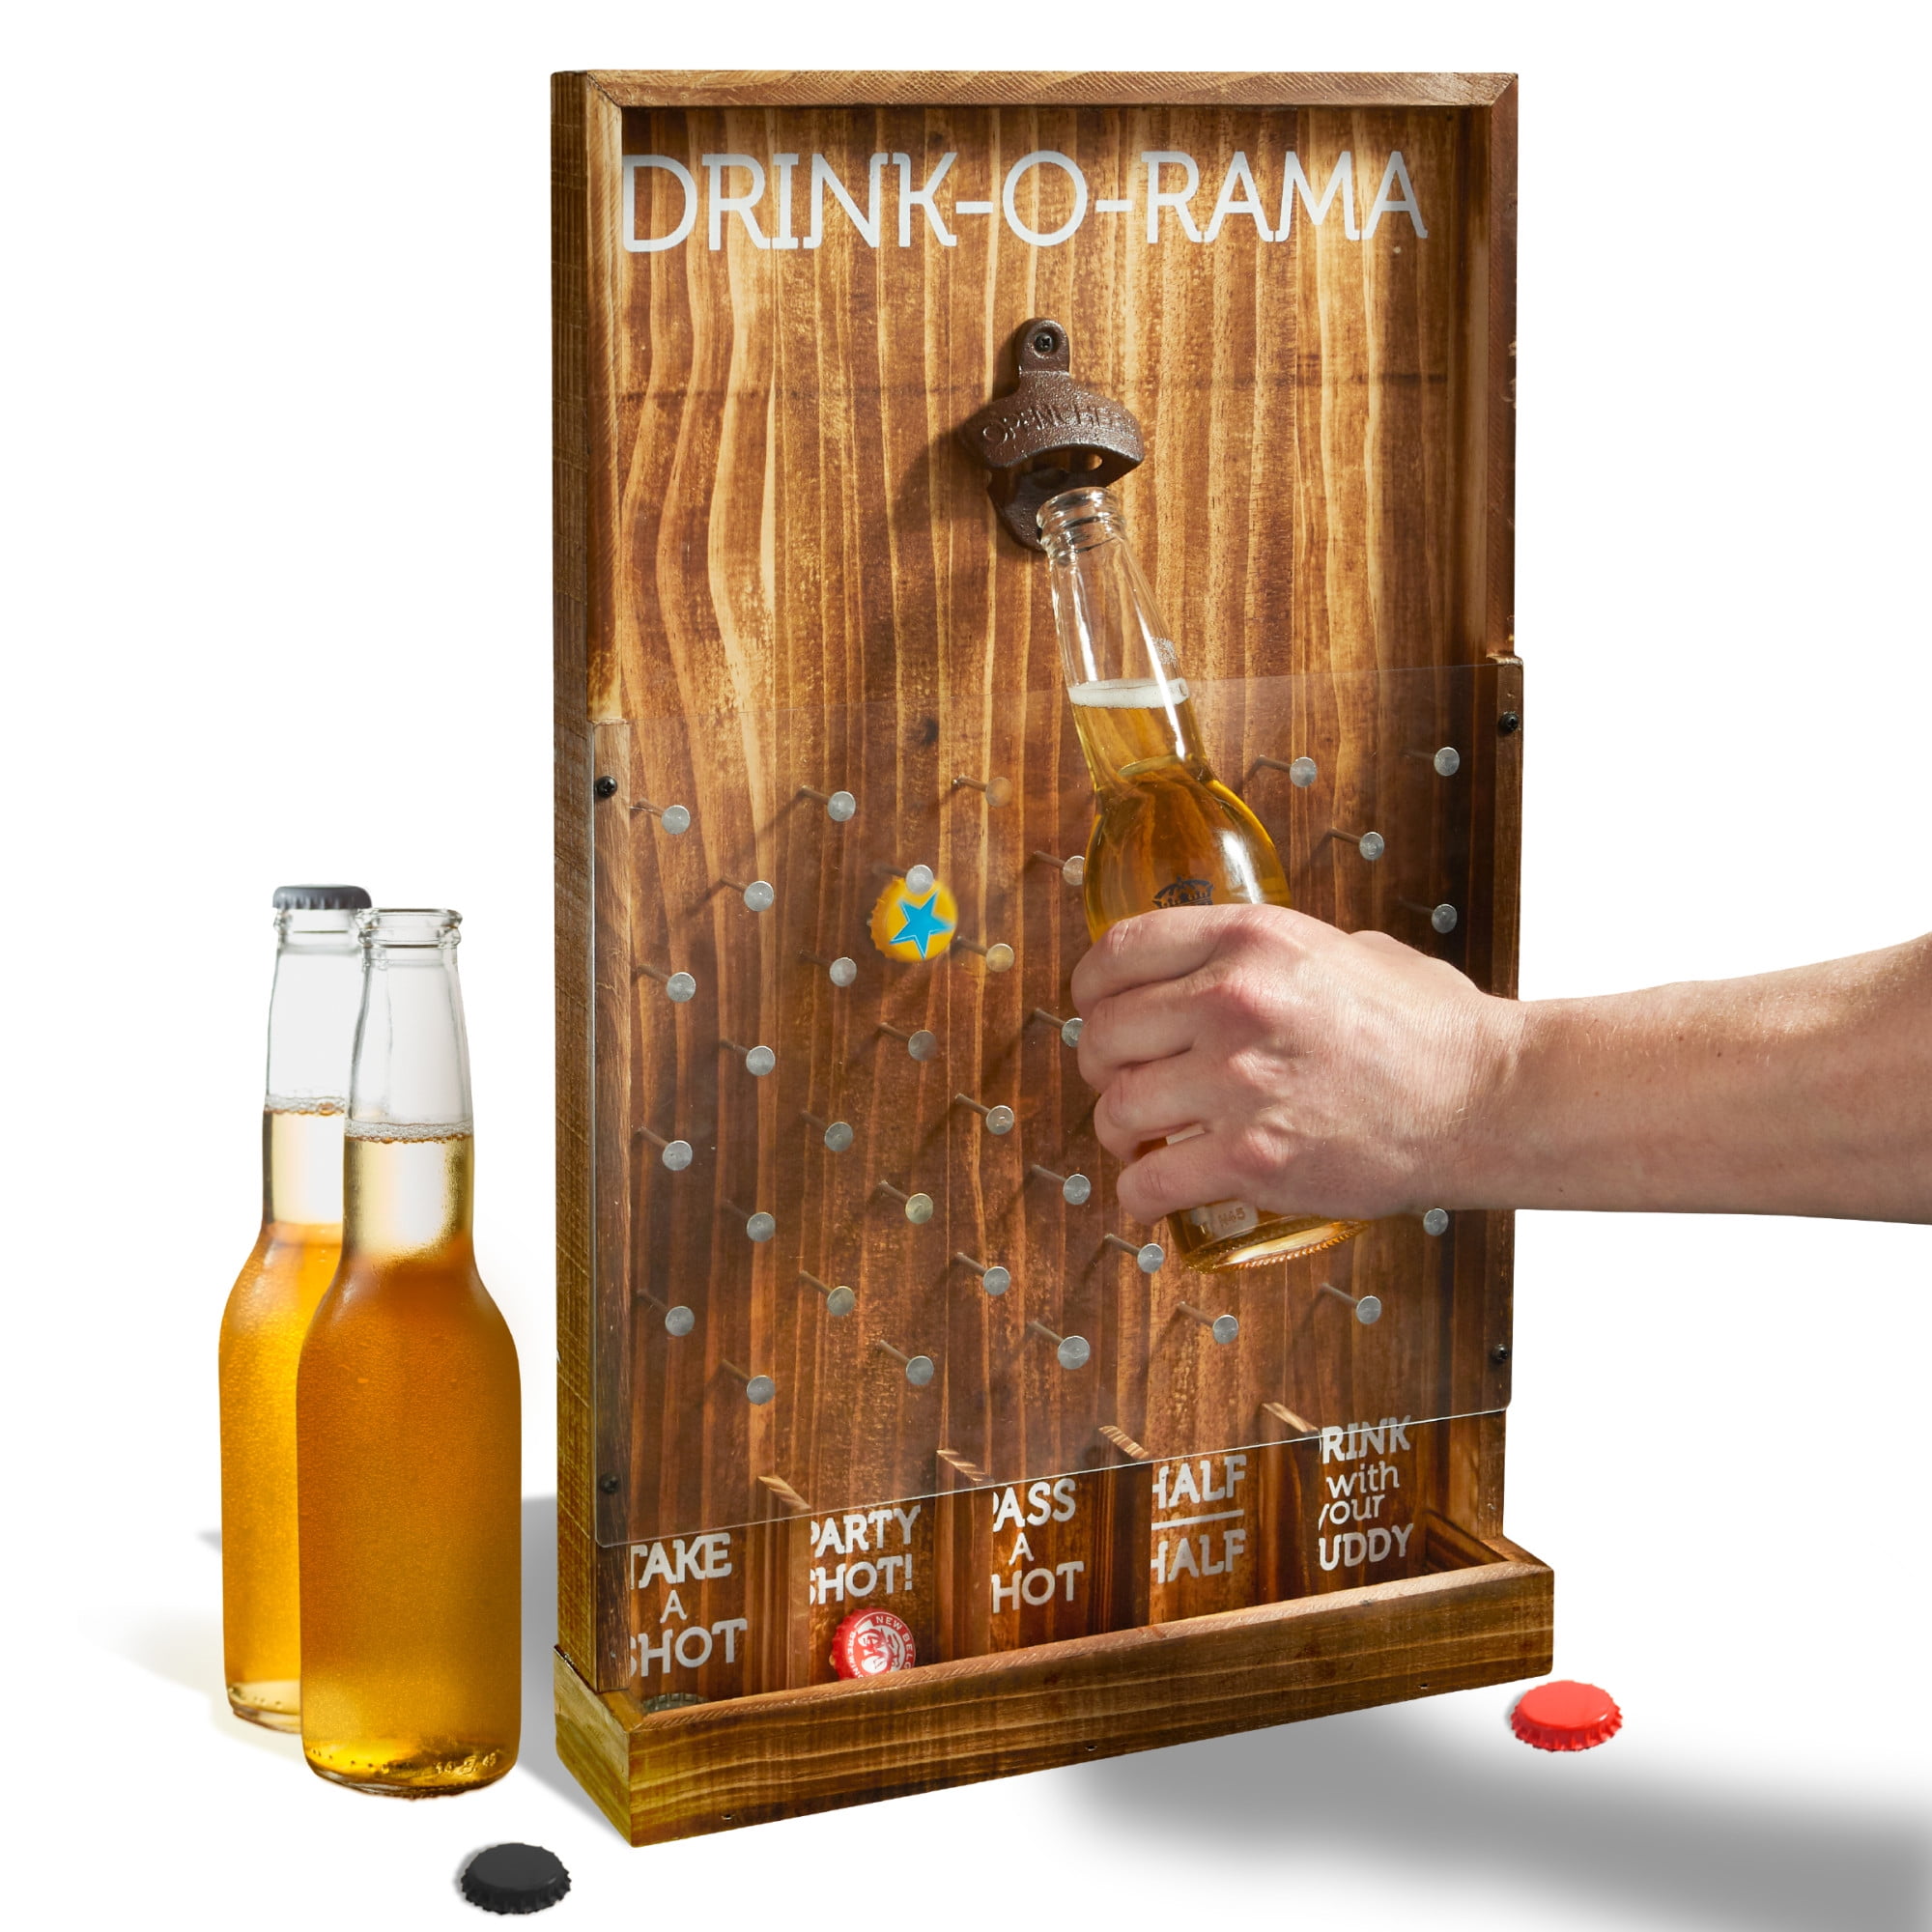 Drink Drop Game Adult Drinking Party Dinner Hen Novelty Alcohol Fun Toy Birthday 